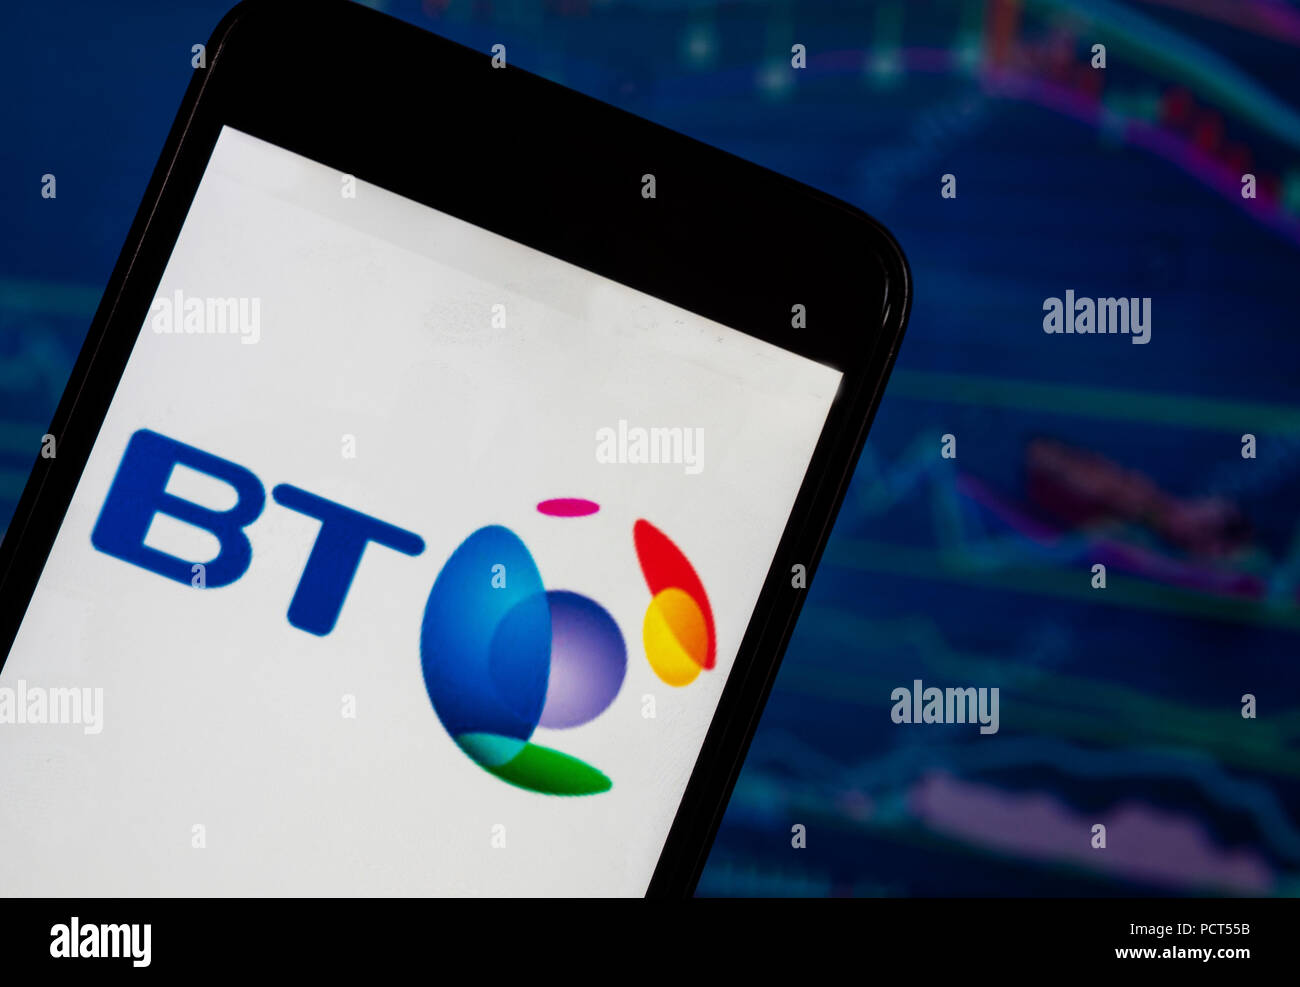 KIEV, UKRAINE - August 4, 2018: The British Telecom application seen  displayed on a smartphone with a background of a stock market shedle. BT  Group plc (trading as BT and formerly British